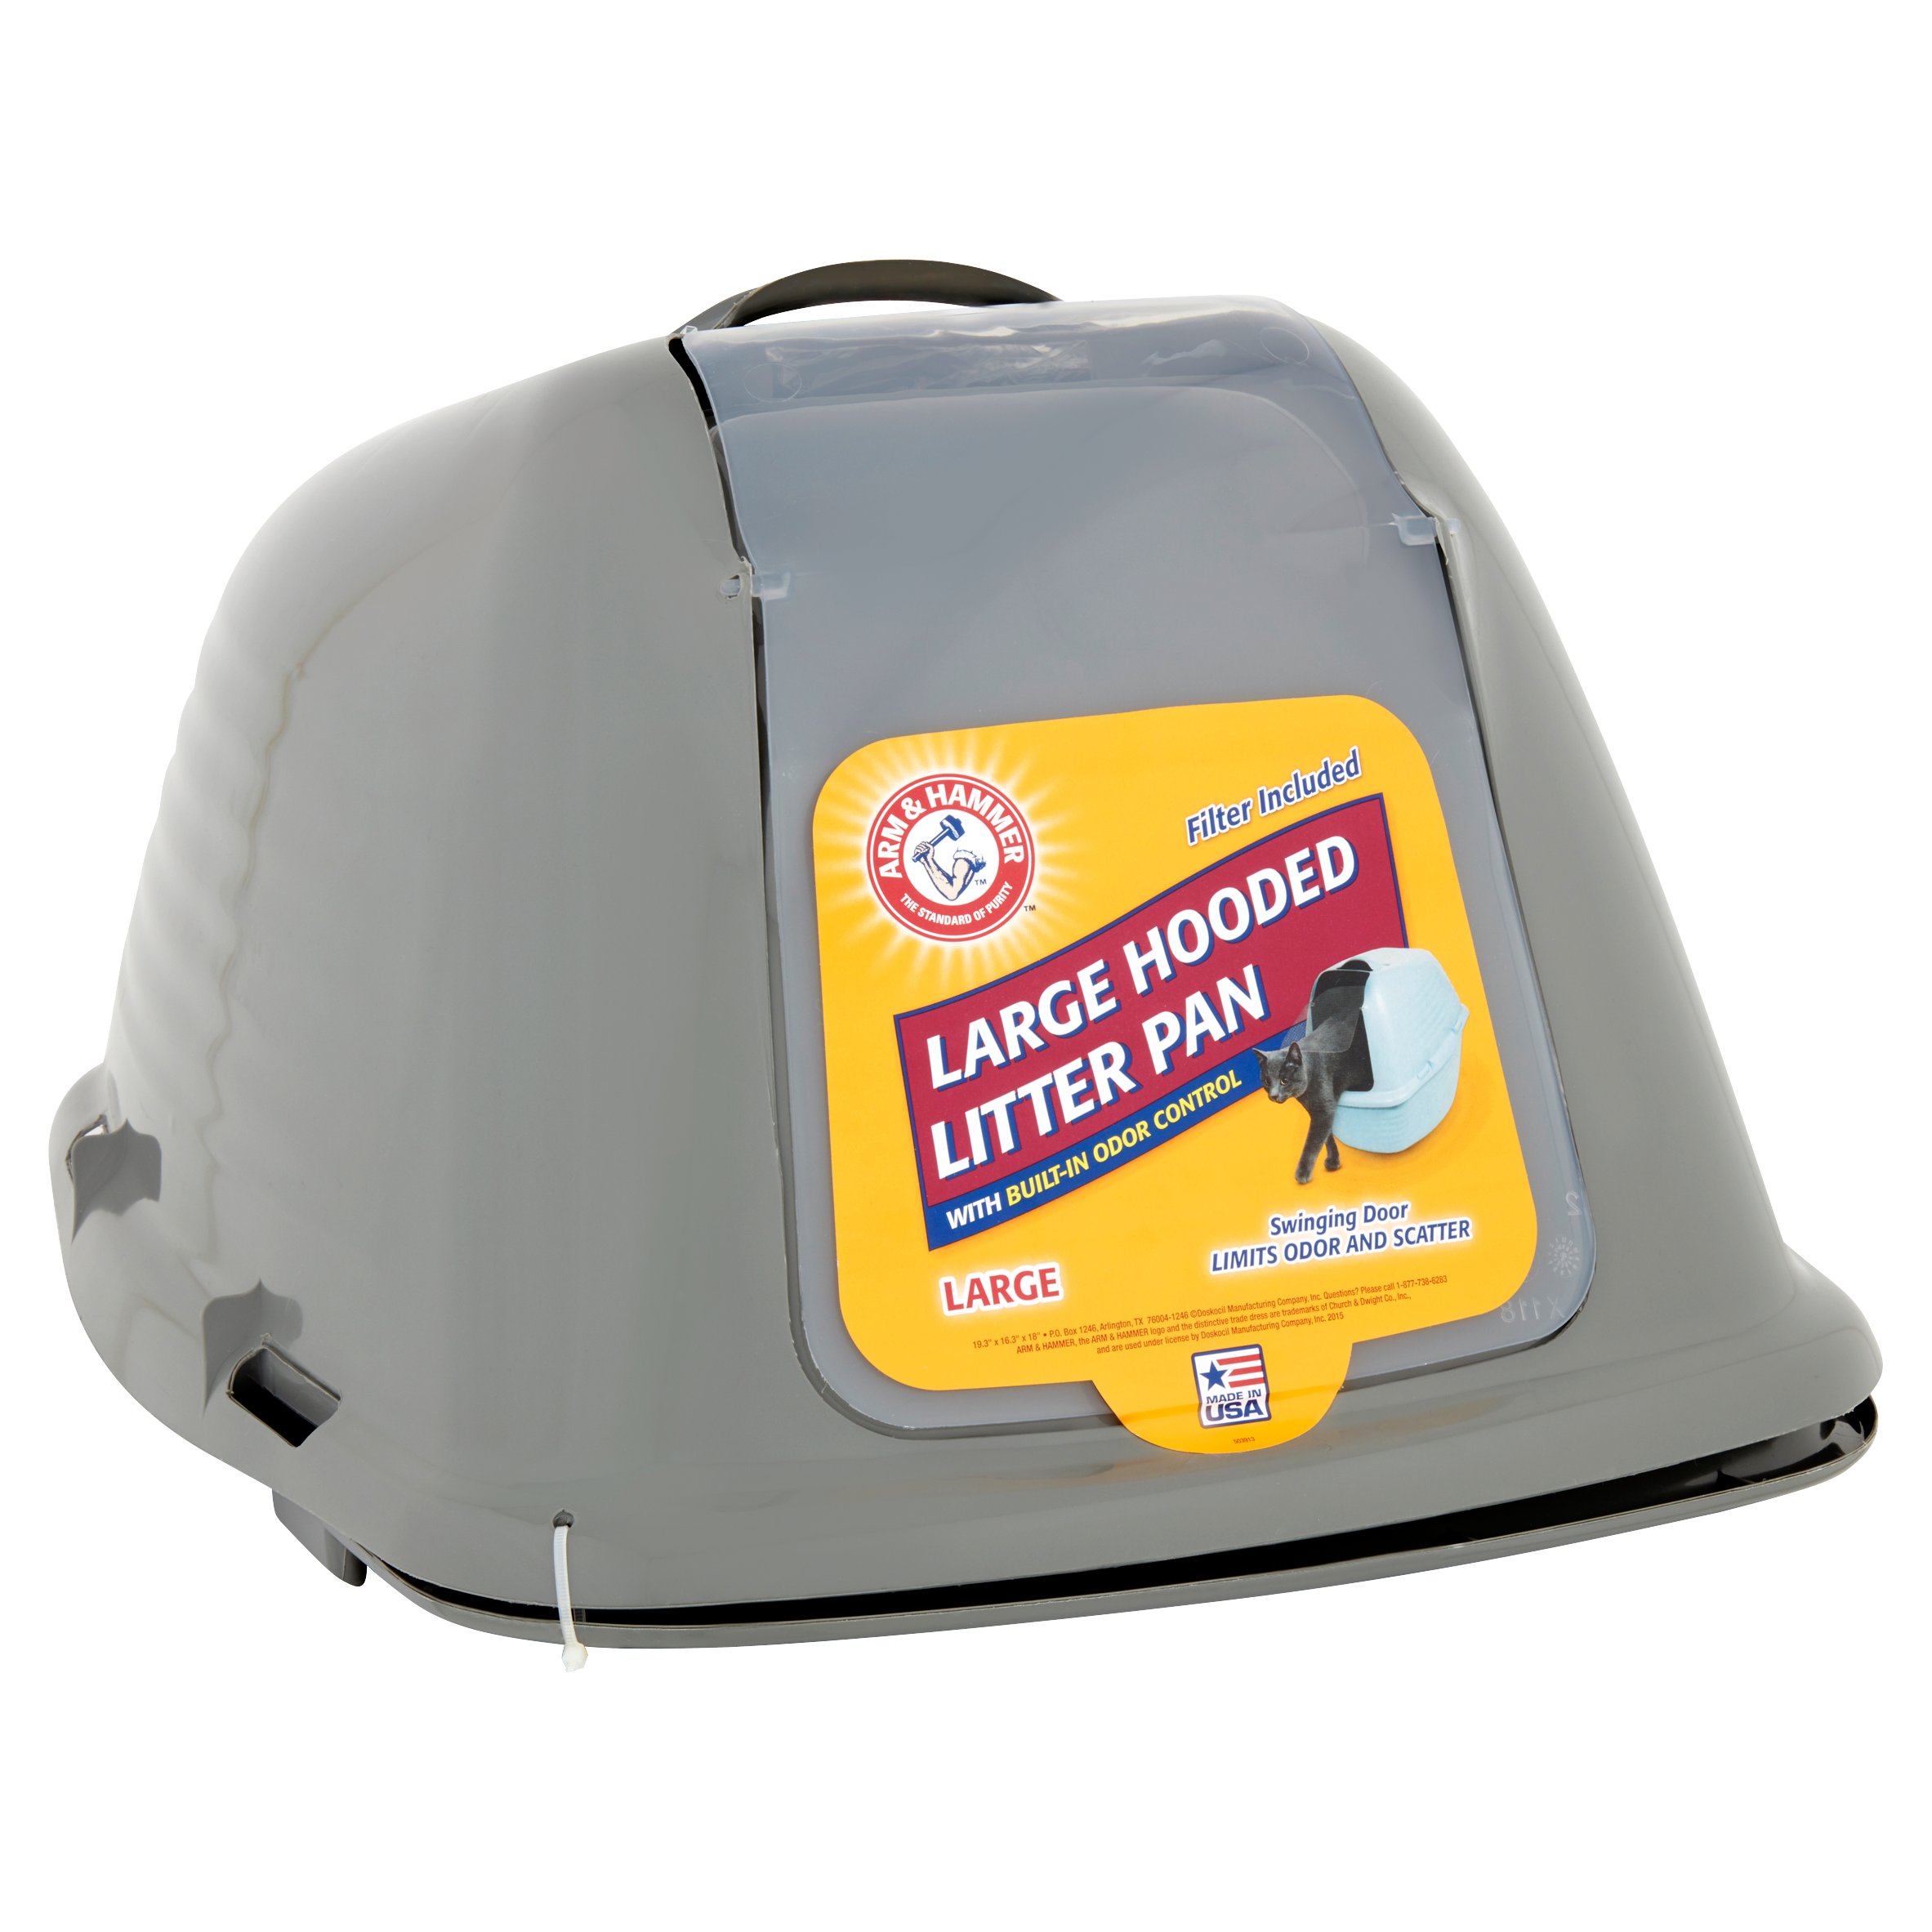 Arm & Hammer Hooded Litter Box Plastic Enclosed Wave Cat Litter Pan with Swing Door, Large - image 5 of 5